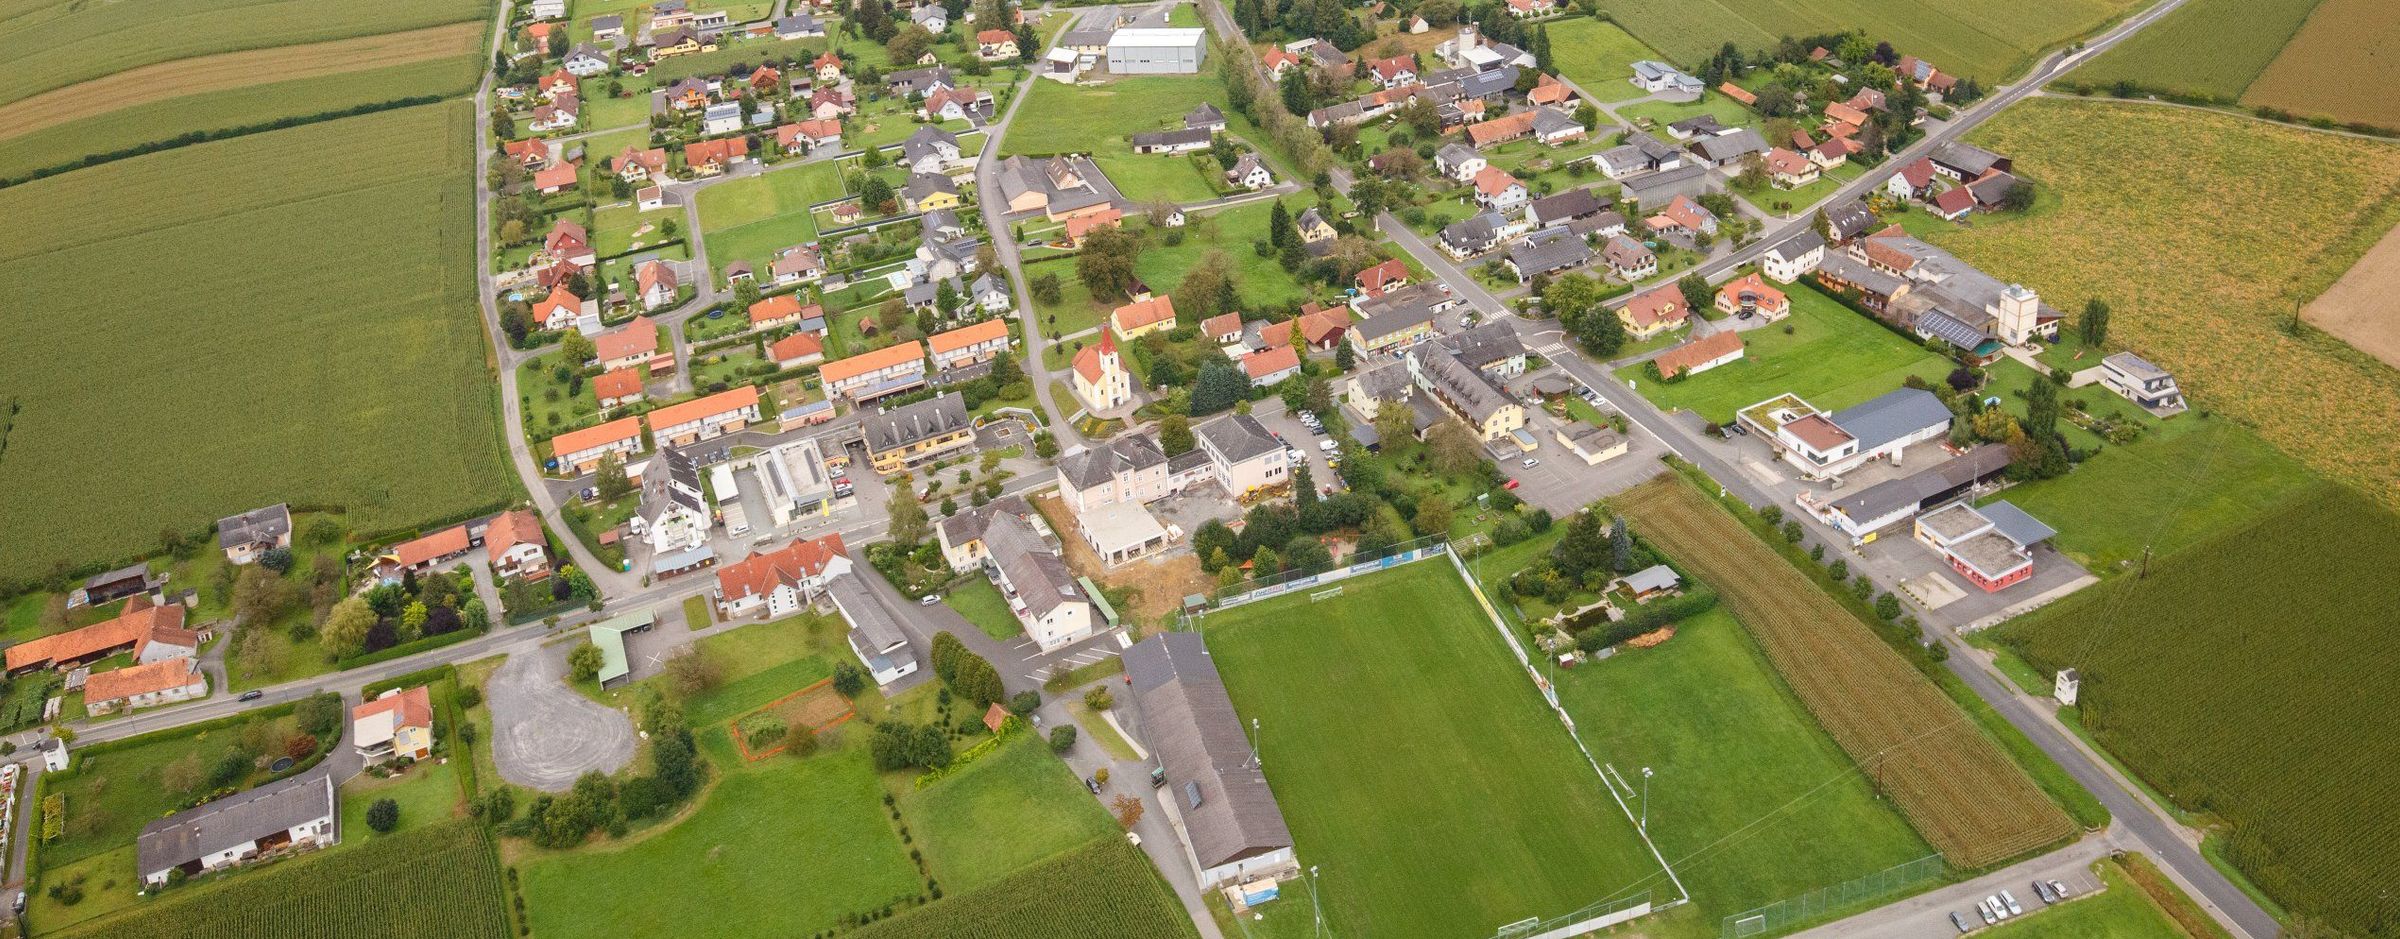 Bild enthält, Outdoors, Nature, Countryside, Rural, Aerial View, Farm, Architecture, Building